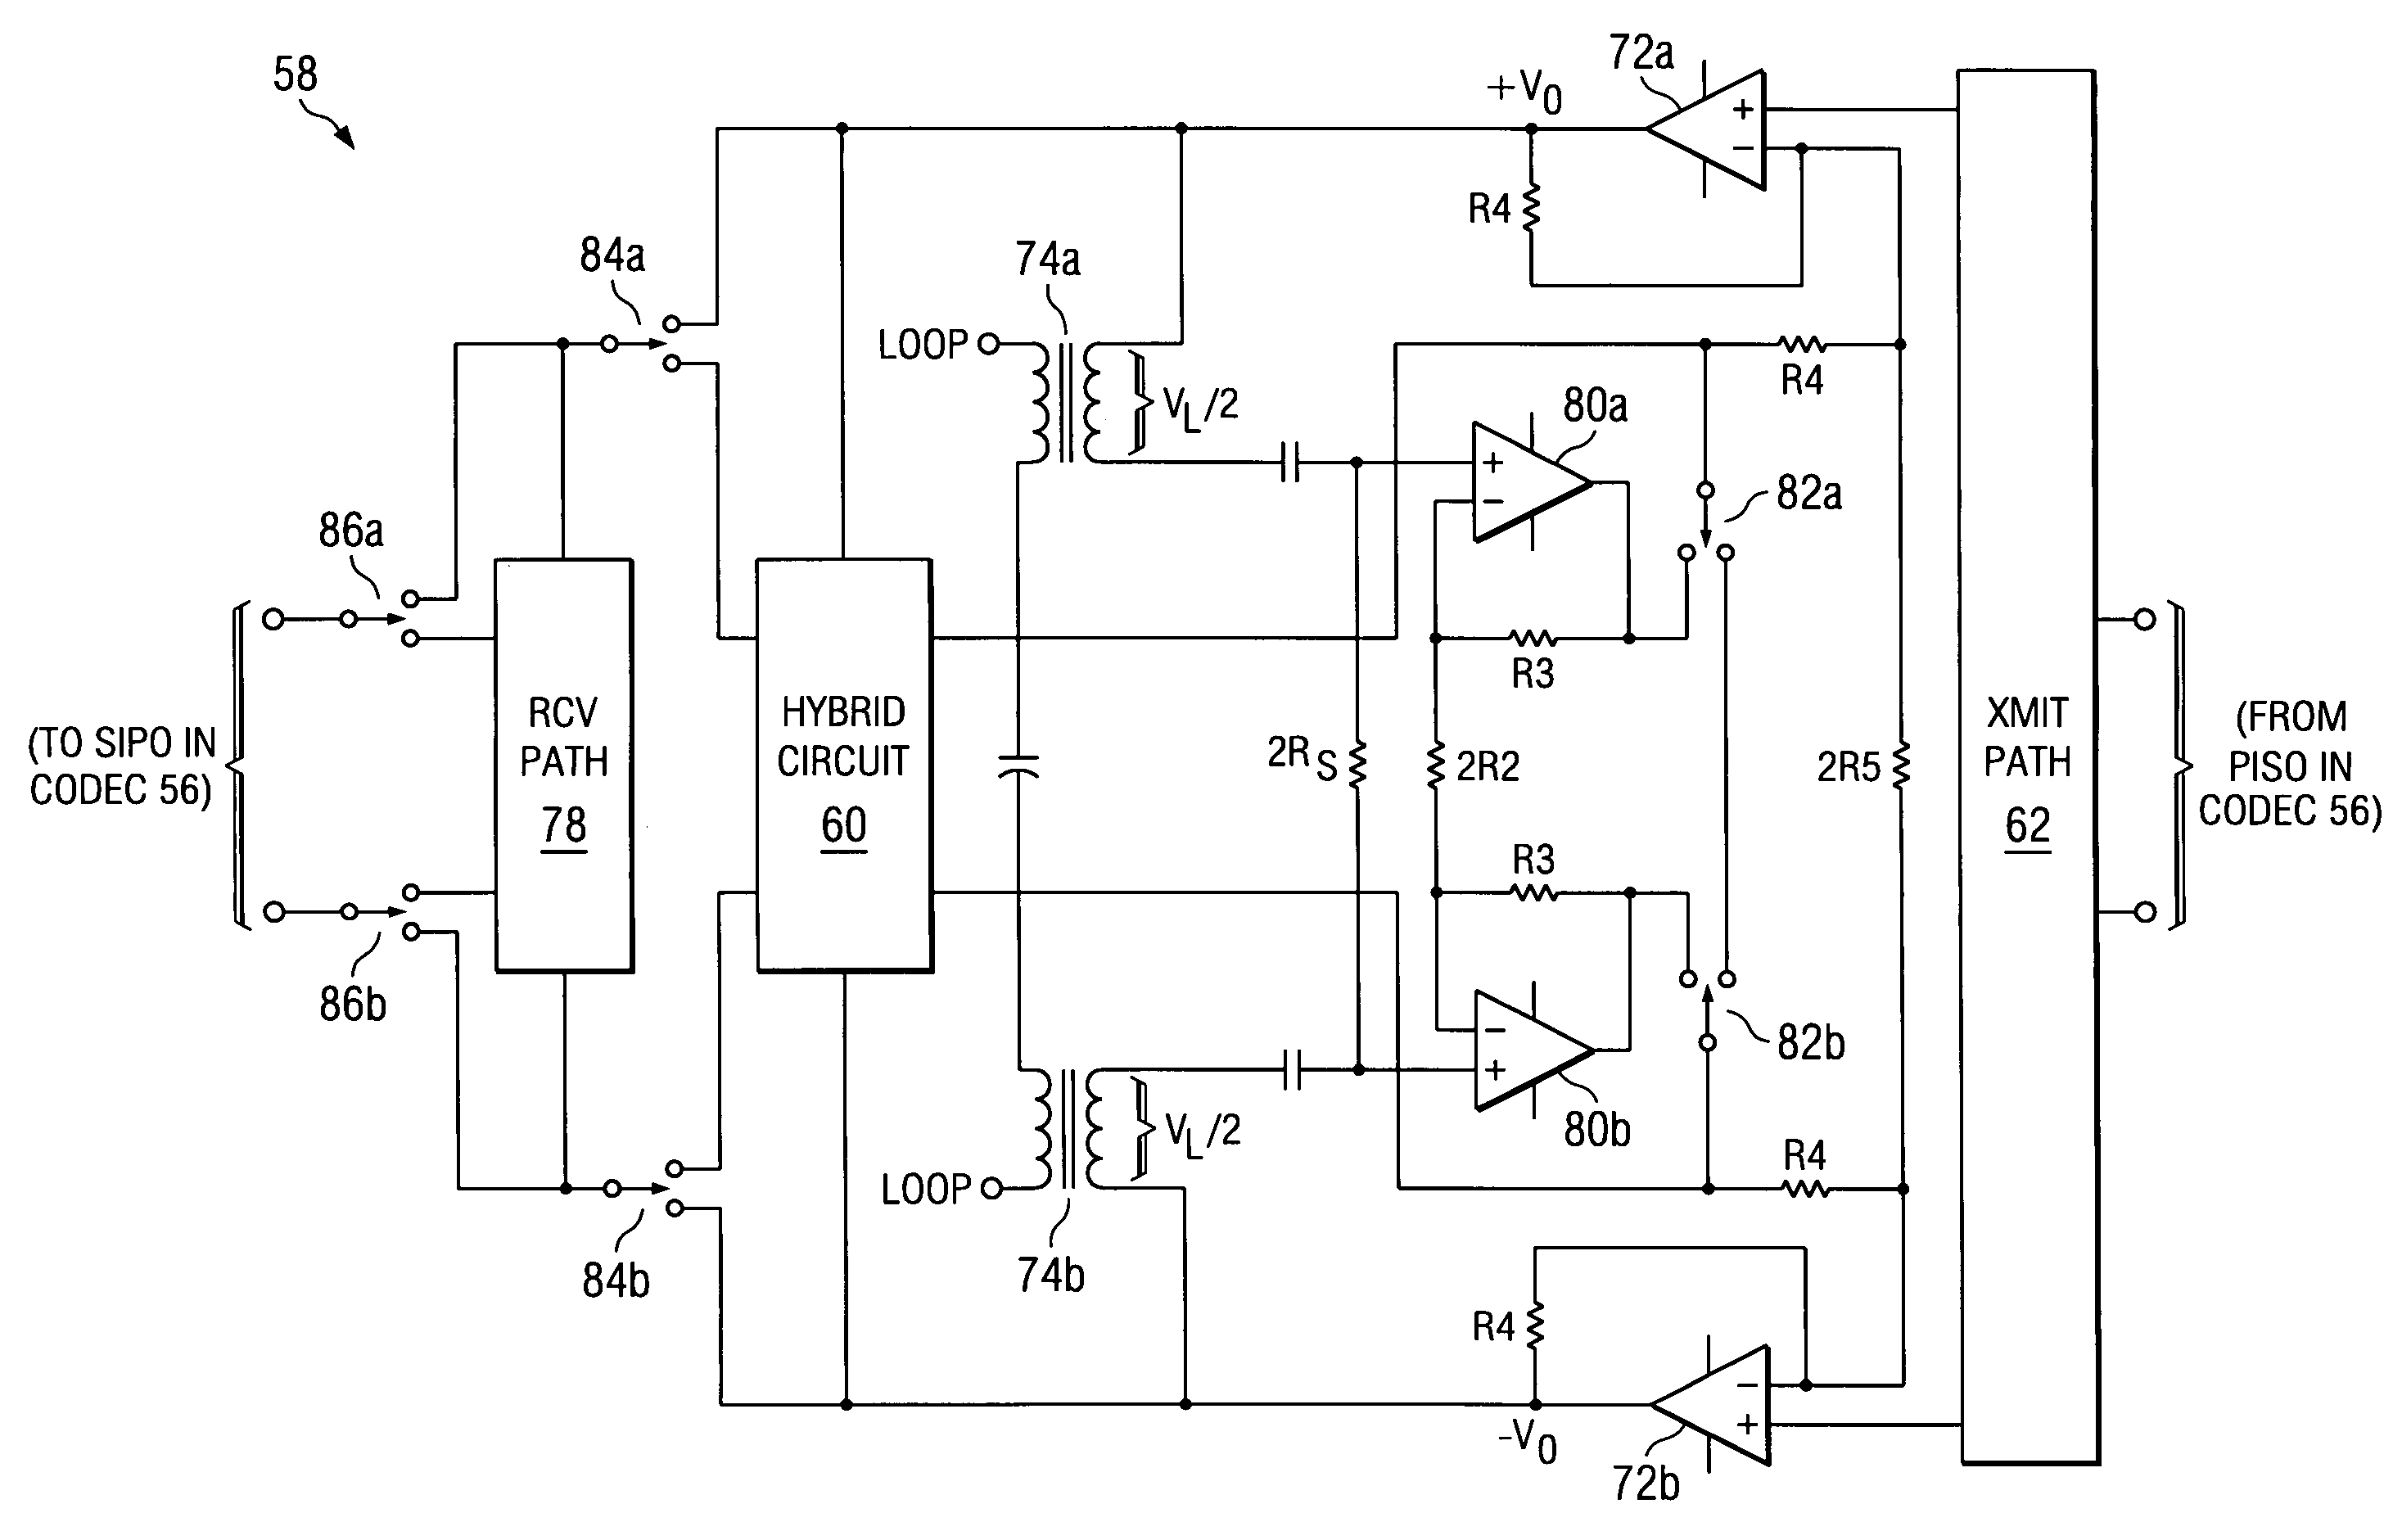 Single-ended loop test circuitry in a central office DSL modem